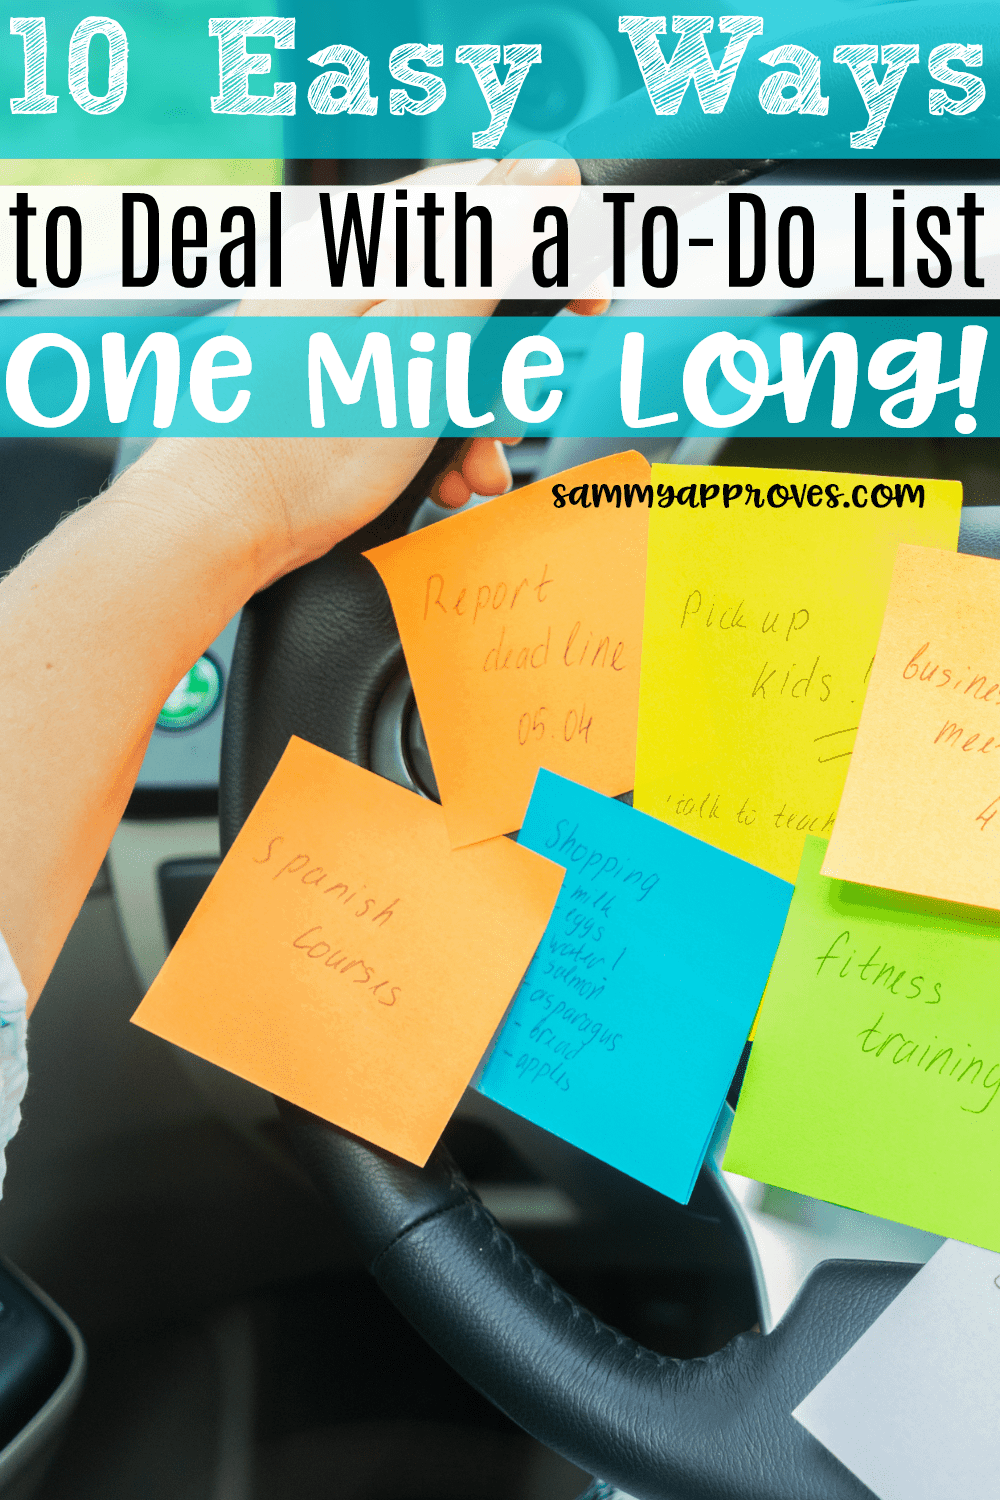 10 Easy Ways to Deal With a To-Do List One Mile Long